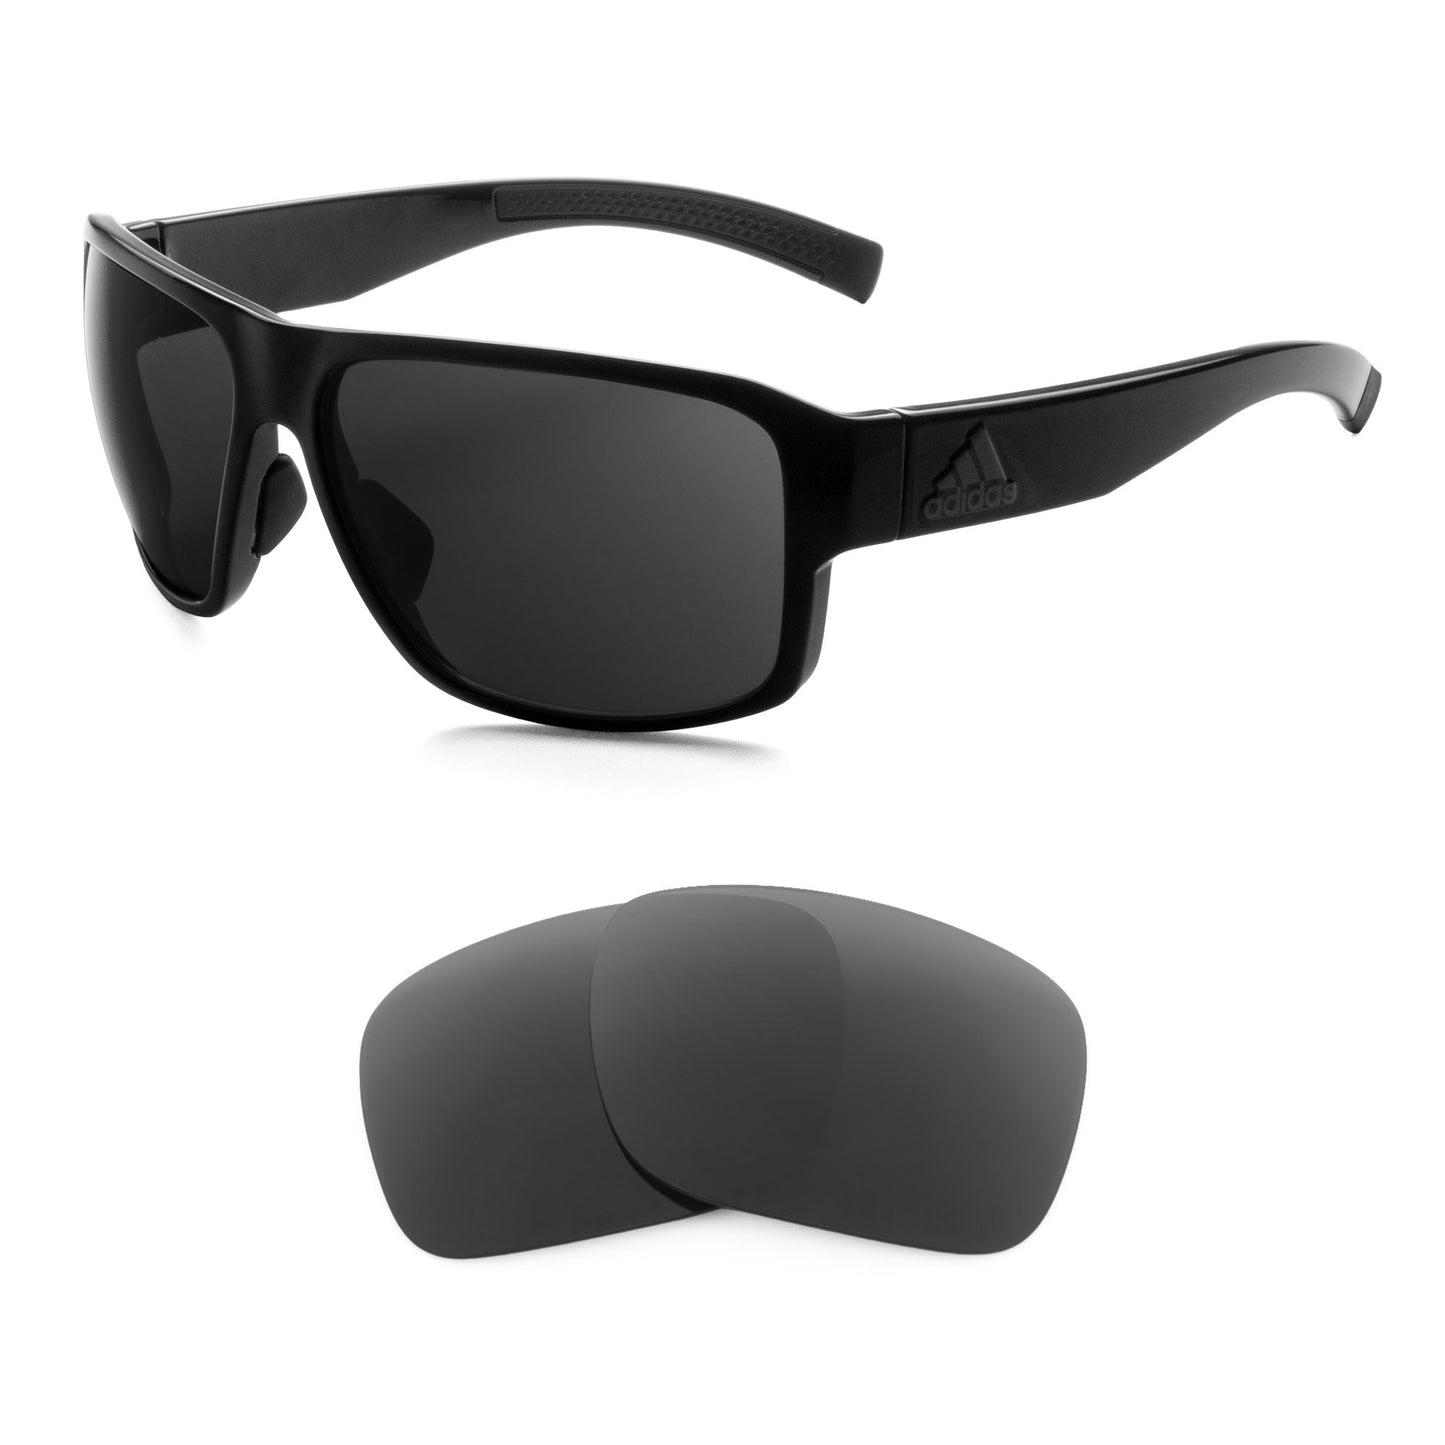 Adidas Jaysor sunglasses with replacement lenses